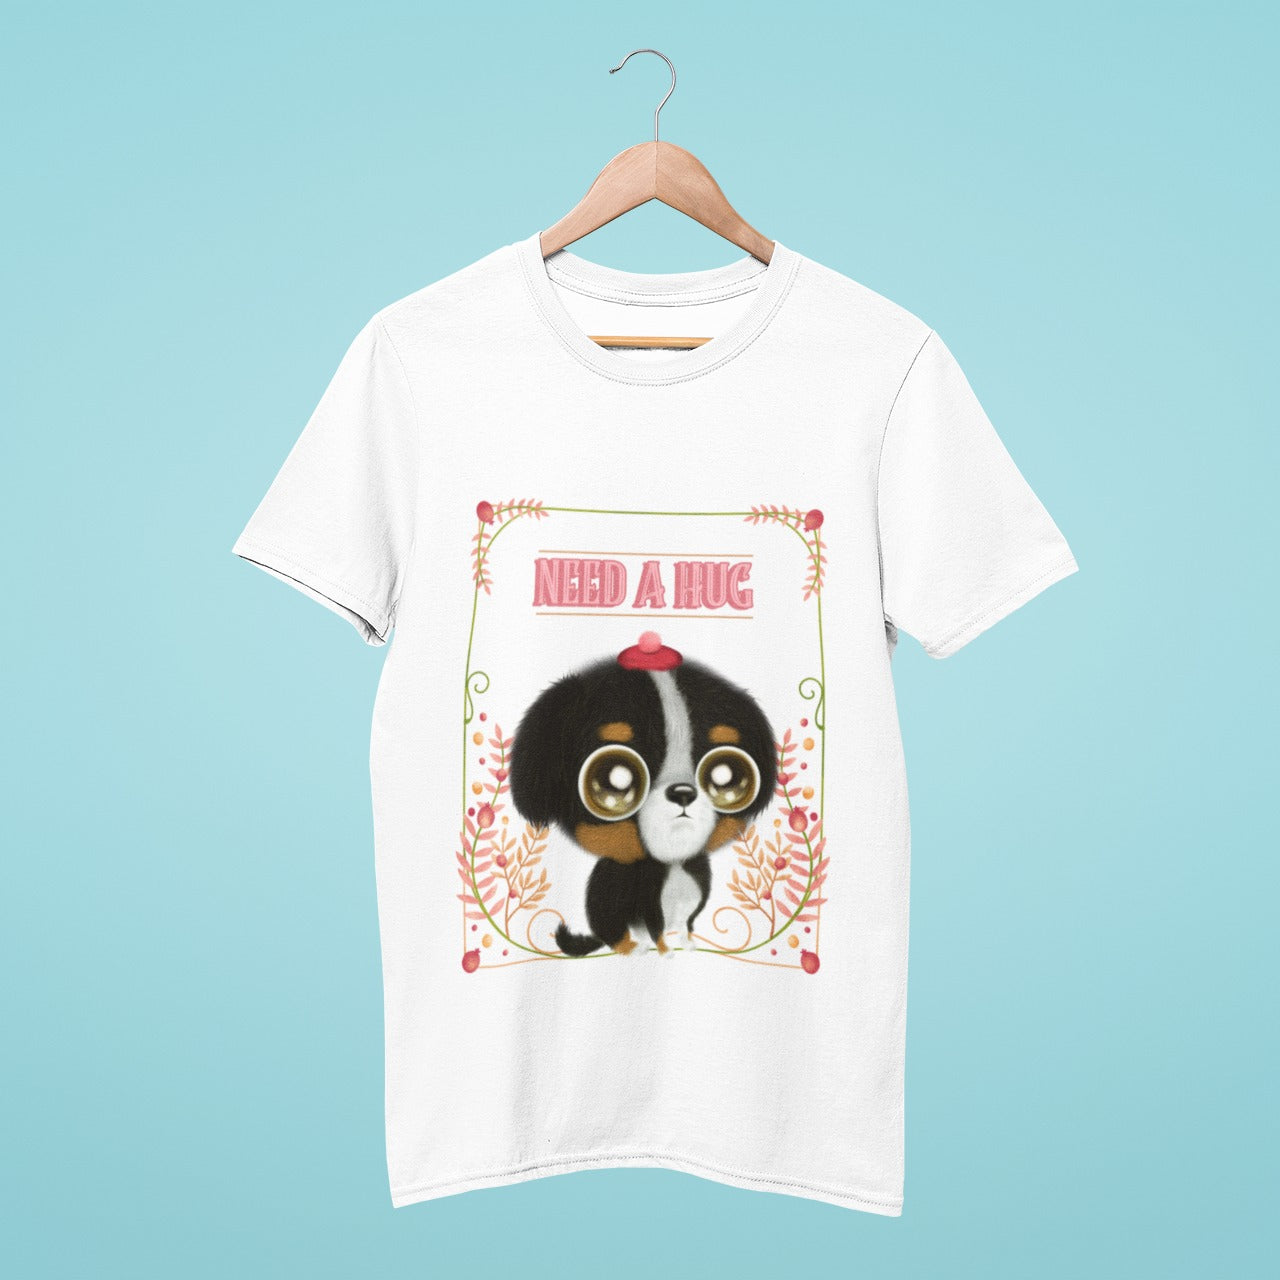 Looking for a cuddly companion? This white t-shirt featuring a cute big-eyed puppy with a big head and the title "Need a Hug?" is the perfect fit for any animal lover. Soft and comfortable, this t-shirt is perfect for everyday wear and is sure to bring a smile to anyone's face. Get yours now and spread some love!